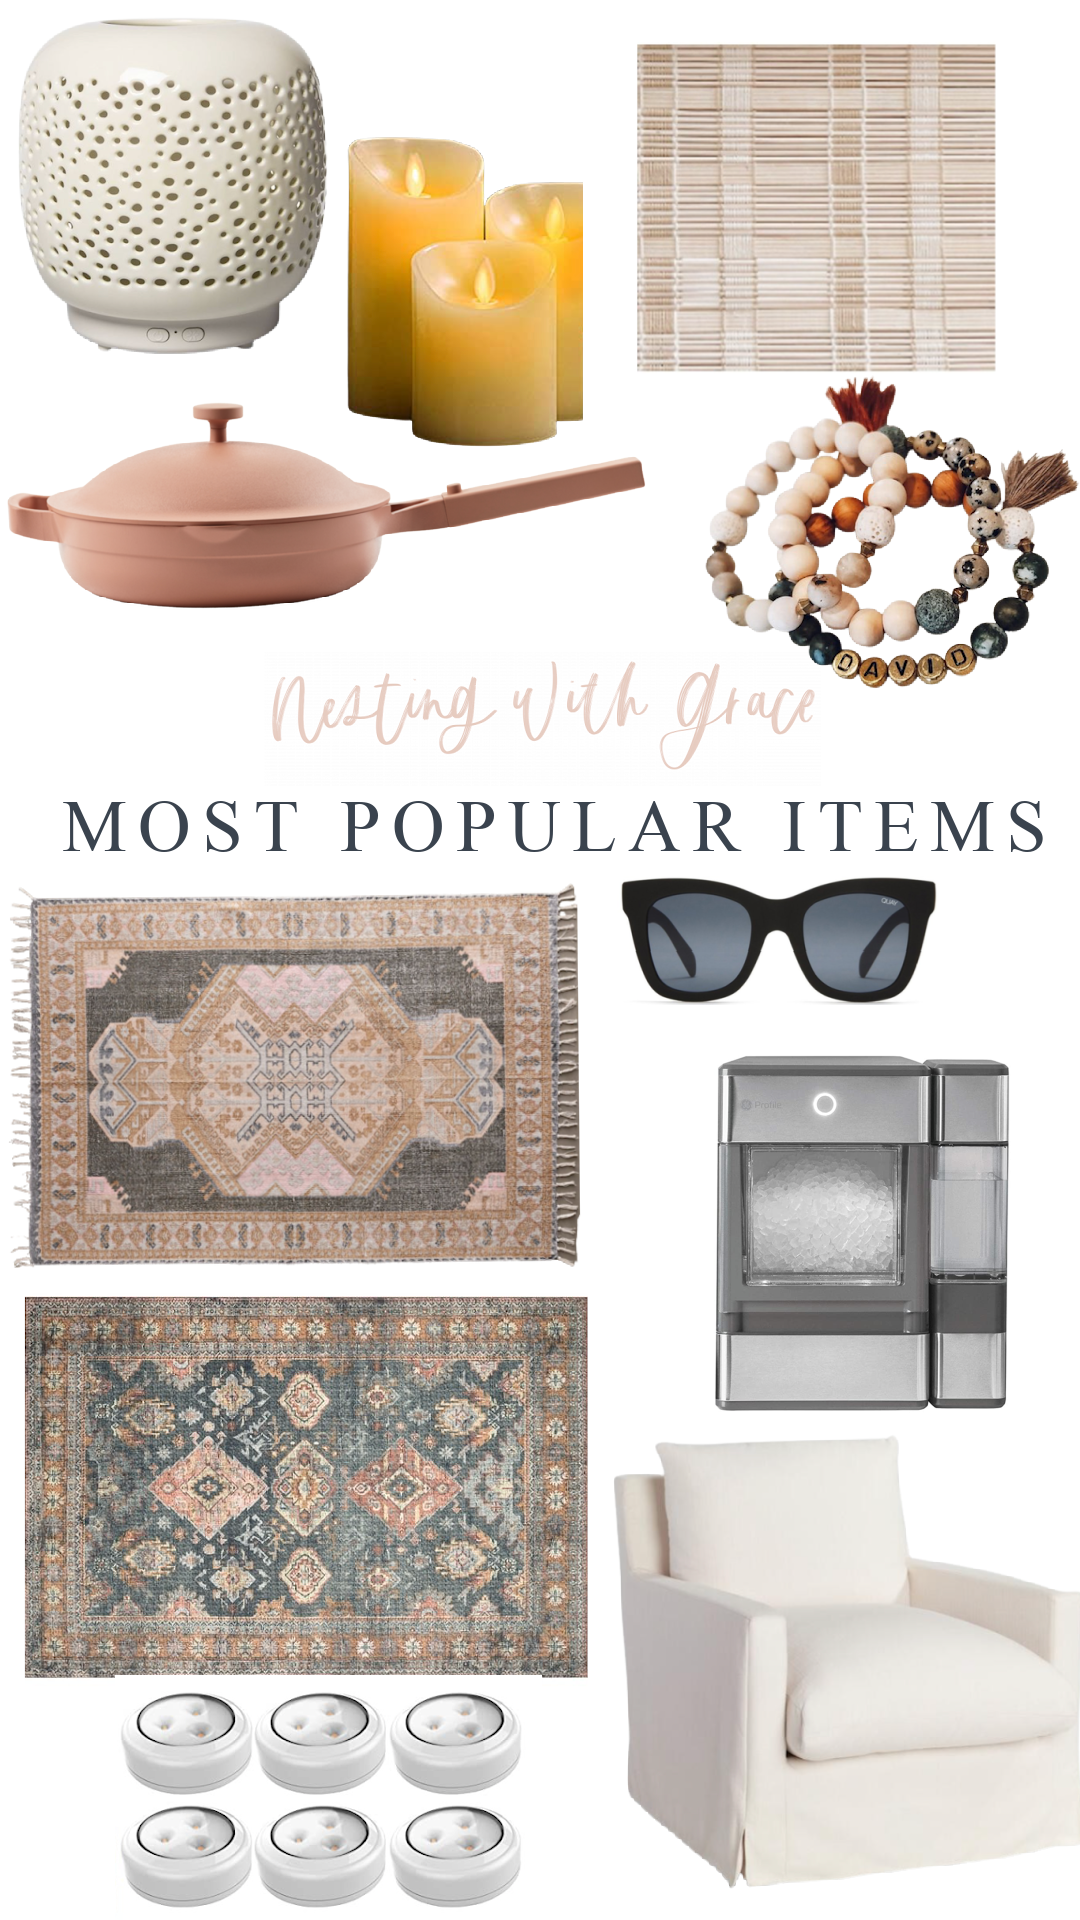 Friday Favorites- Wallpapered Closet, Plants, Sleeping Pillows and more